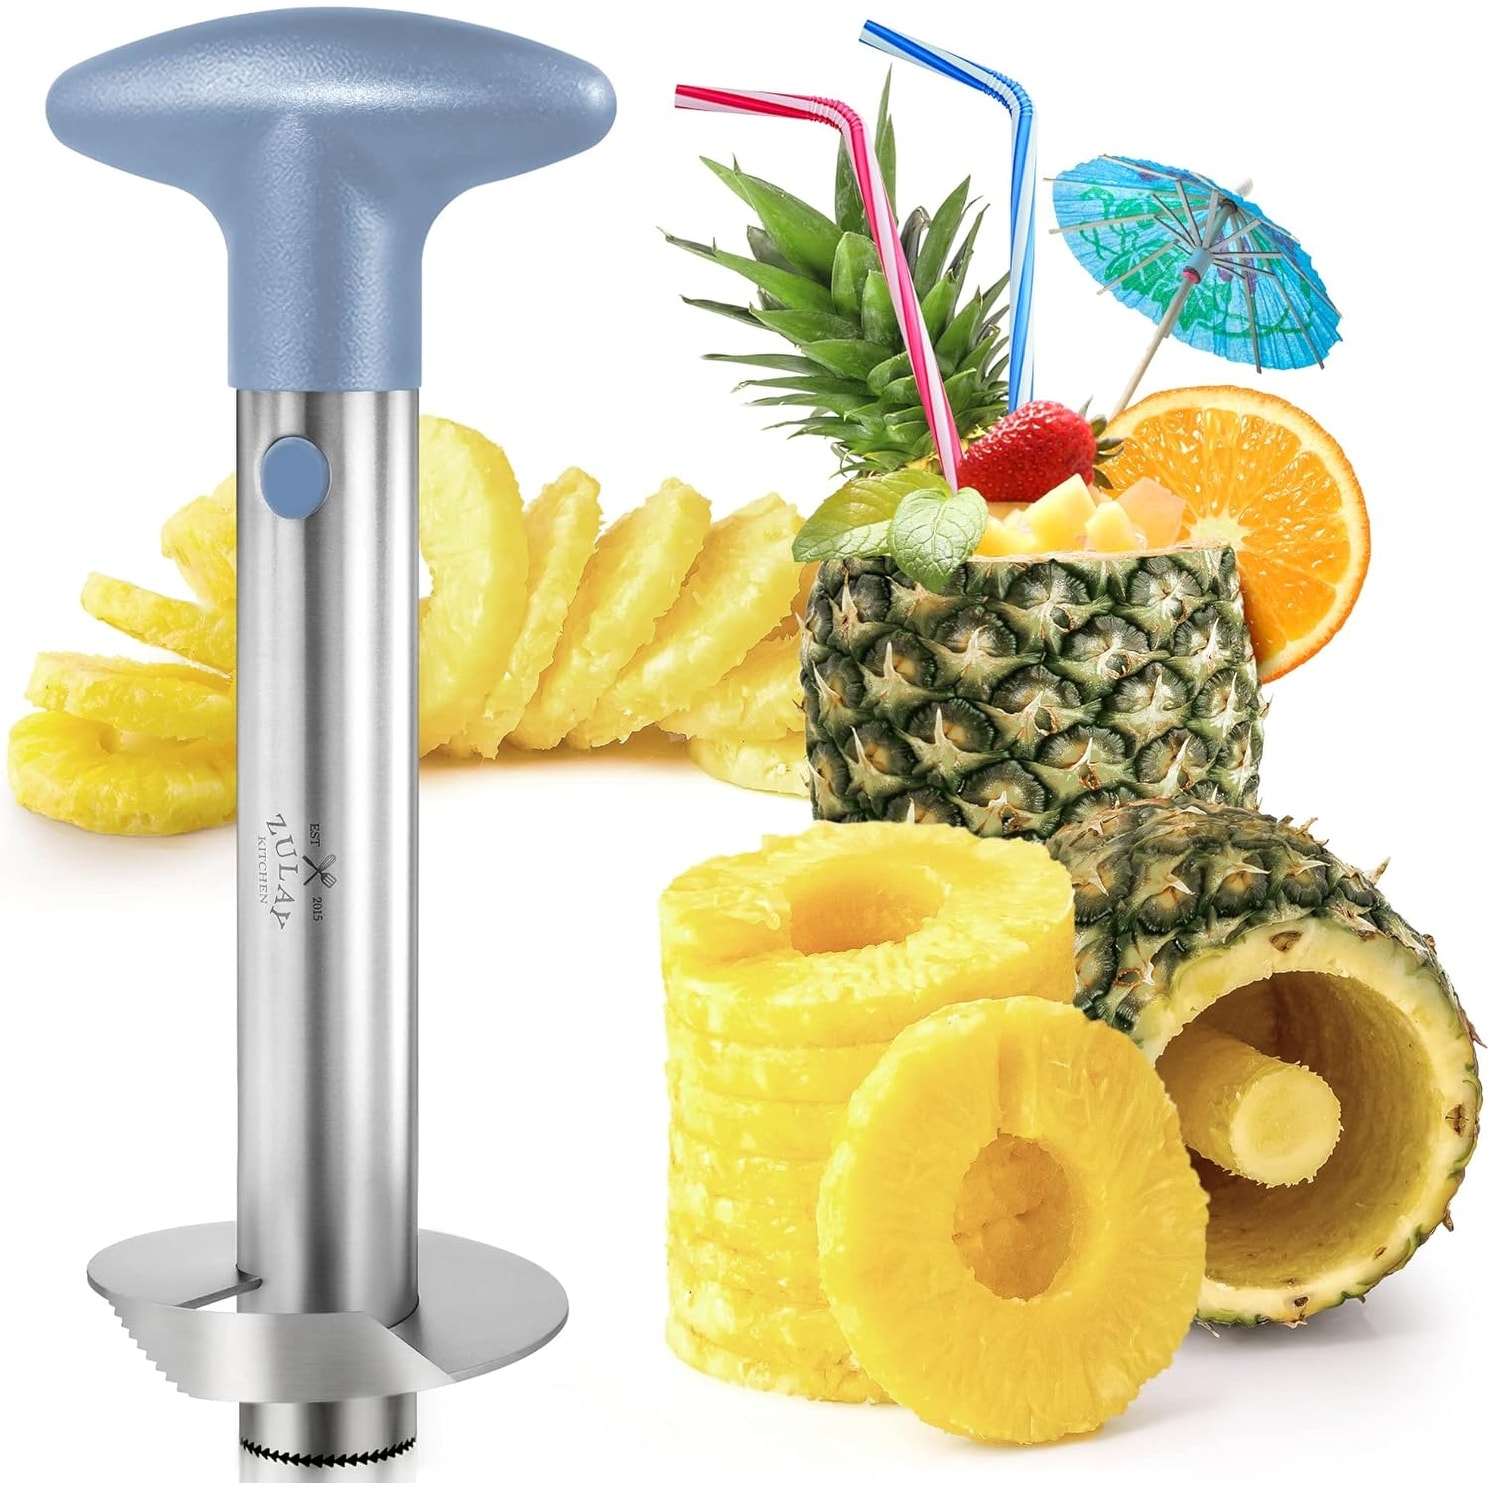 https://ak1.ostkcdn.com/images/products/is/images/direct/7166ba97457ac85bd30e1d9d82bcebc8360d2775/Zulay-Kitchen-Pineapple-Cutter-and-Corer-with-Triple-Reinforced-Stainless-Steel.jpg